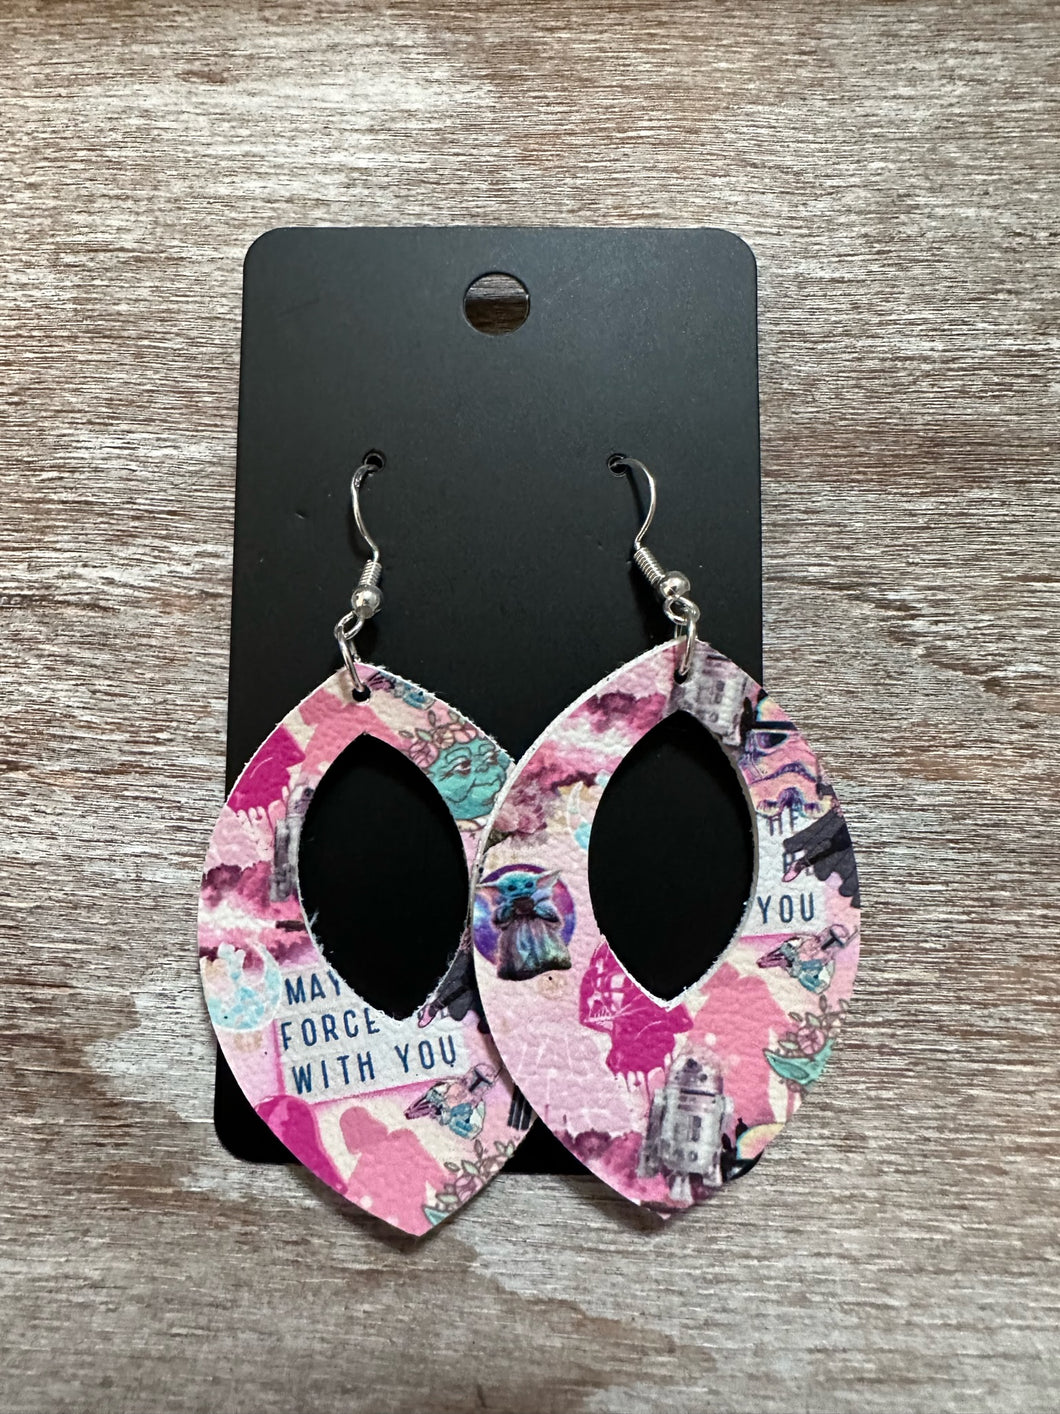 Girly May the Force Earrings